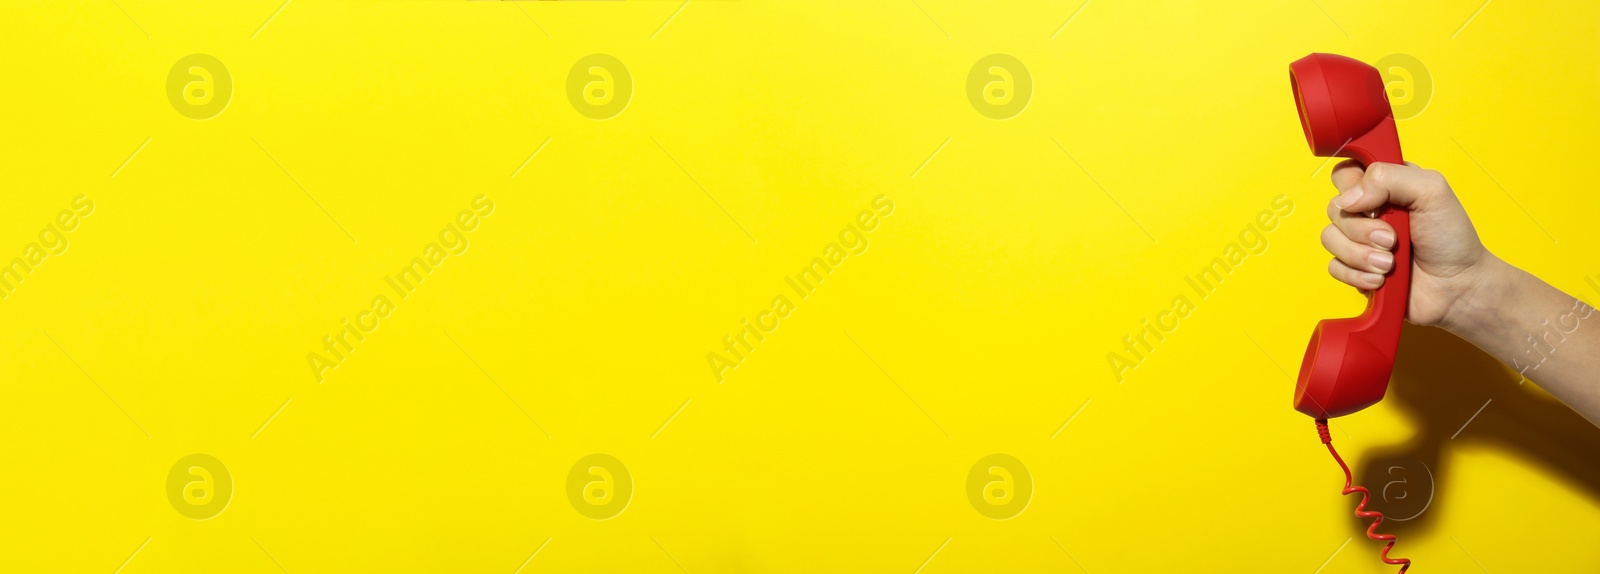 Image of Hotline service. Woman with telephone receiver and space for text on yellow background, banner design